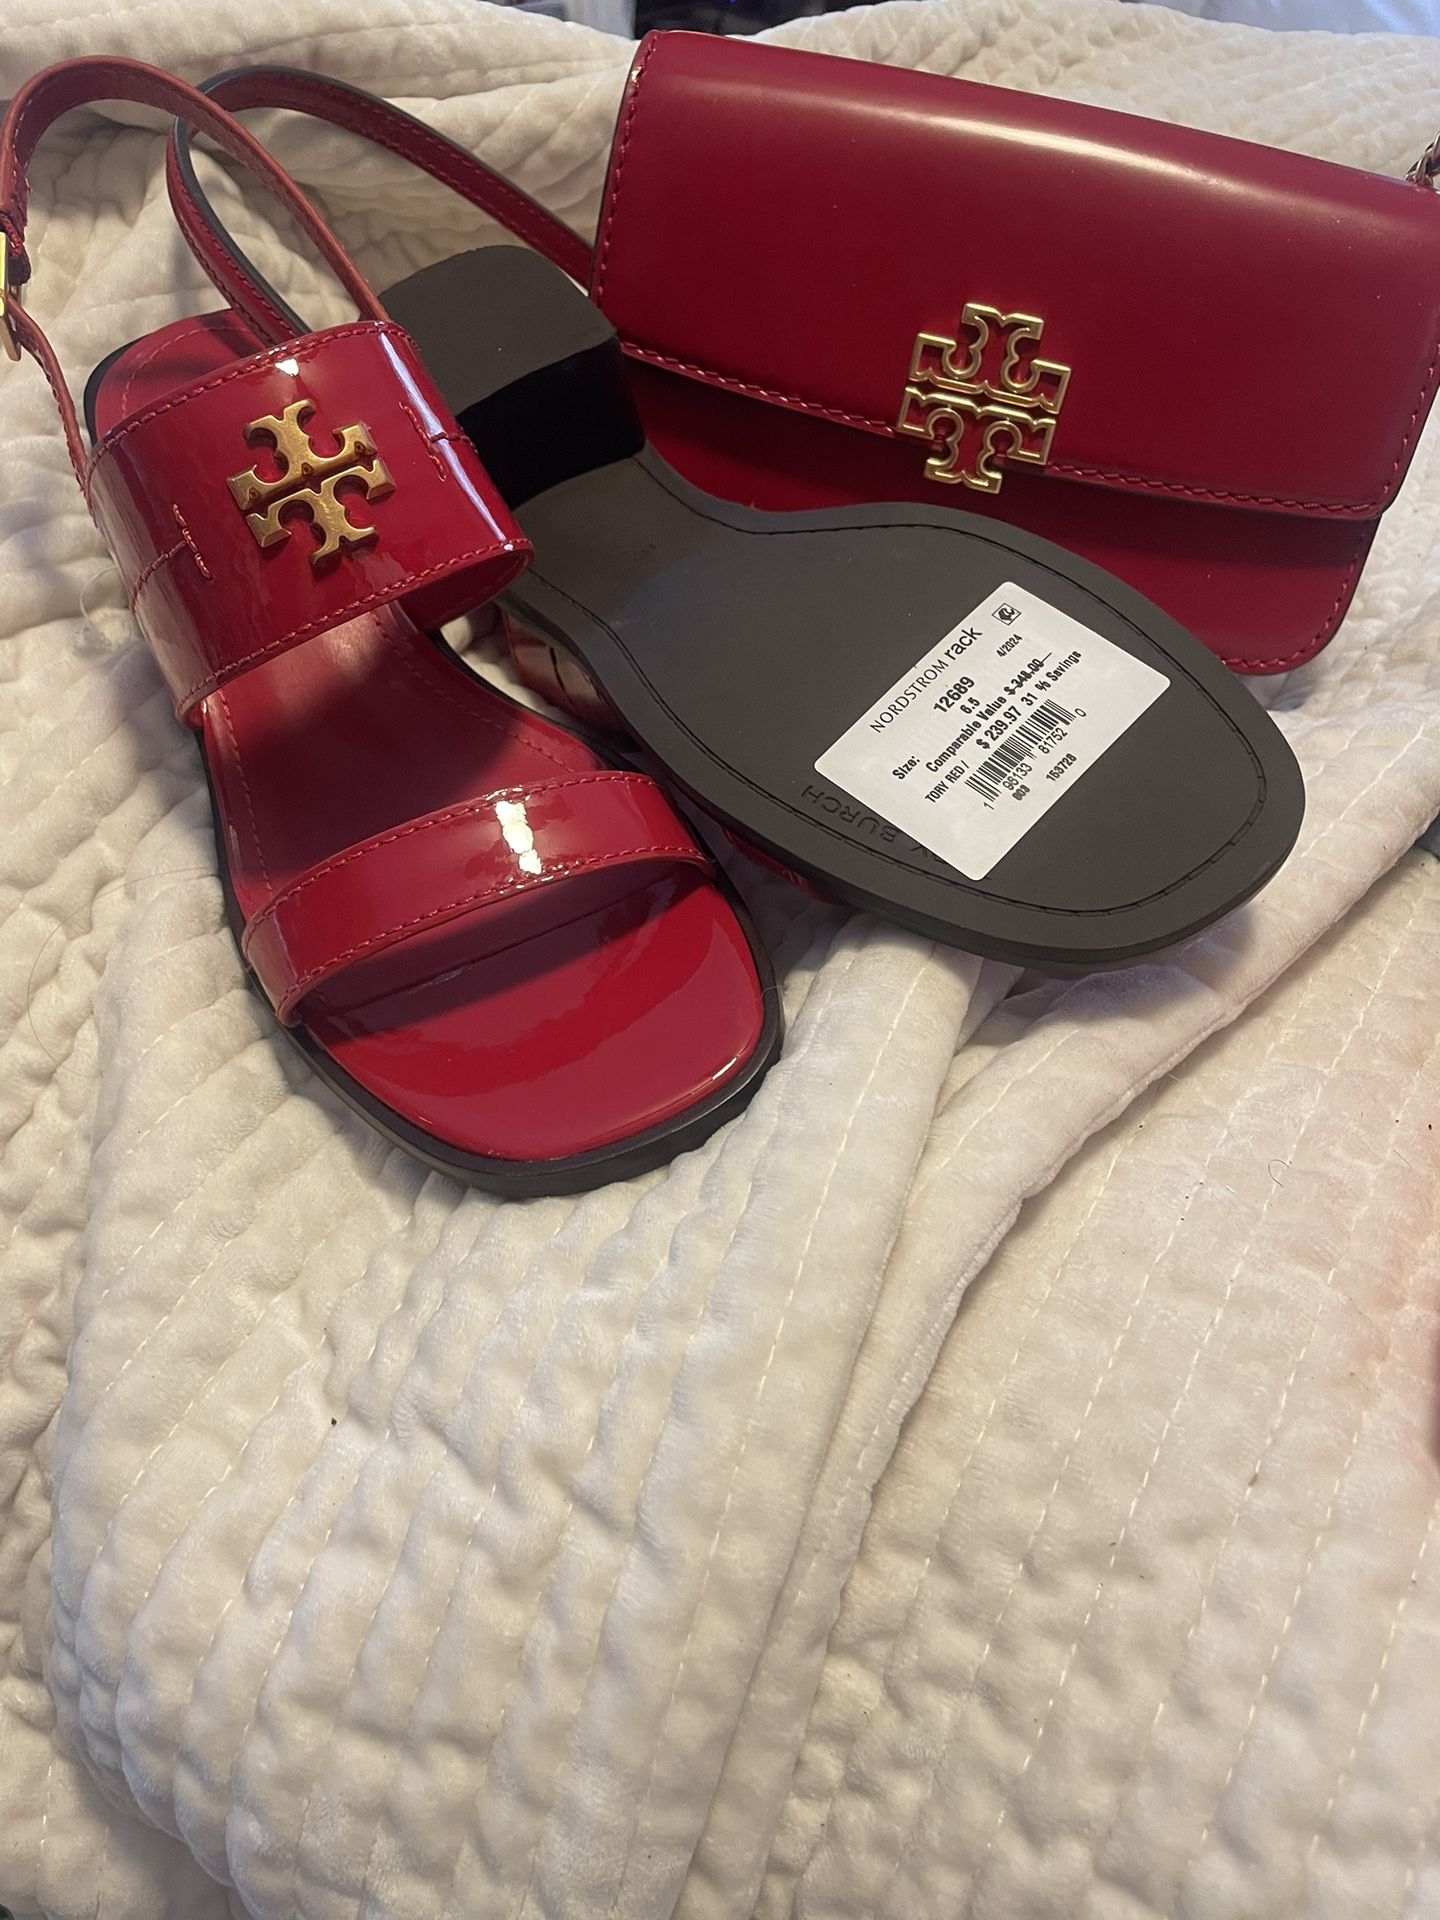 NWT Tory Burch Shoulder bag And Matching Sandals